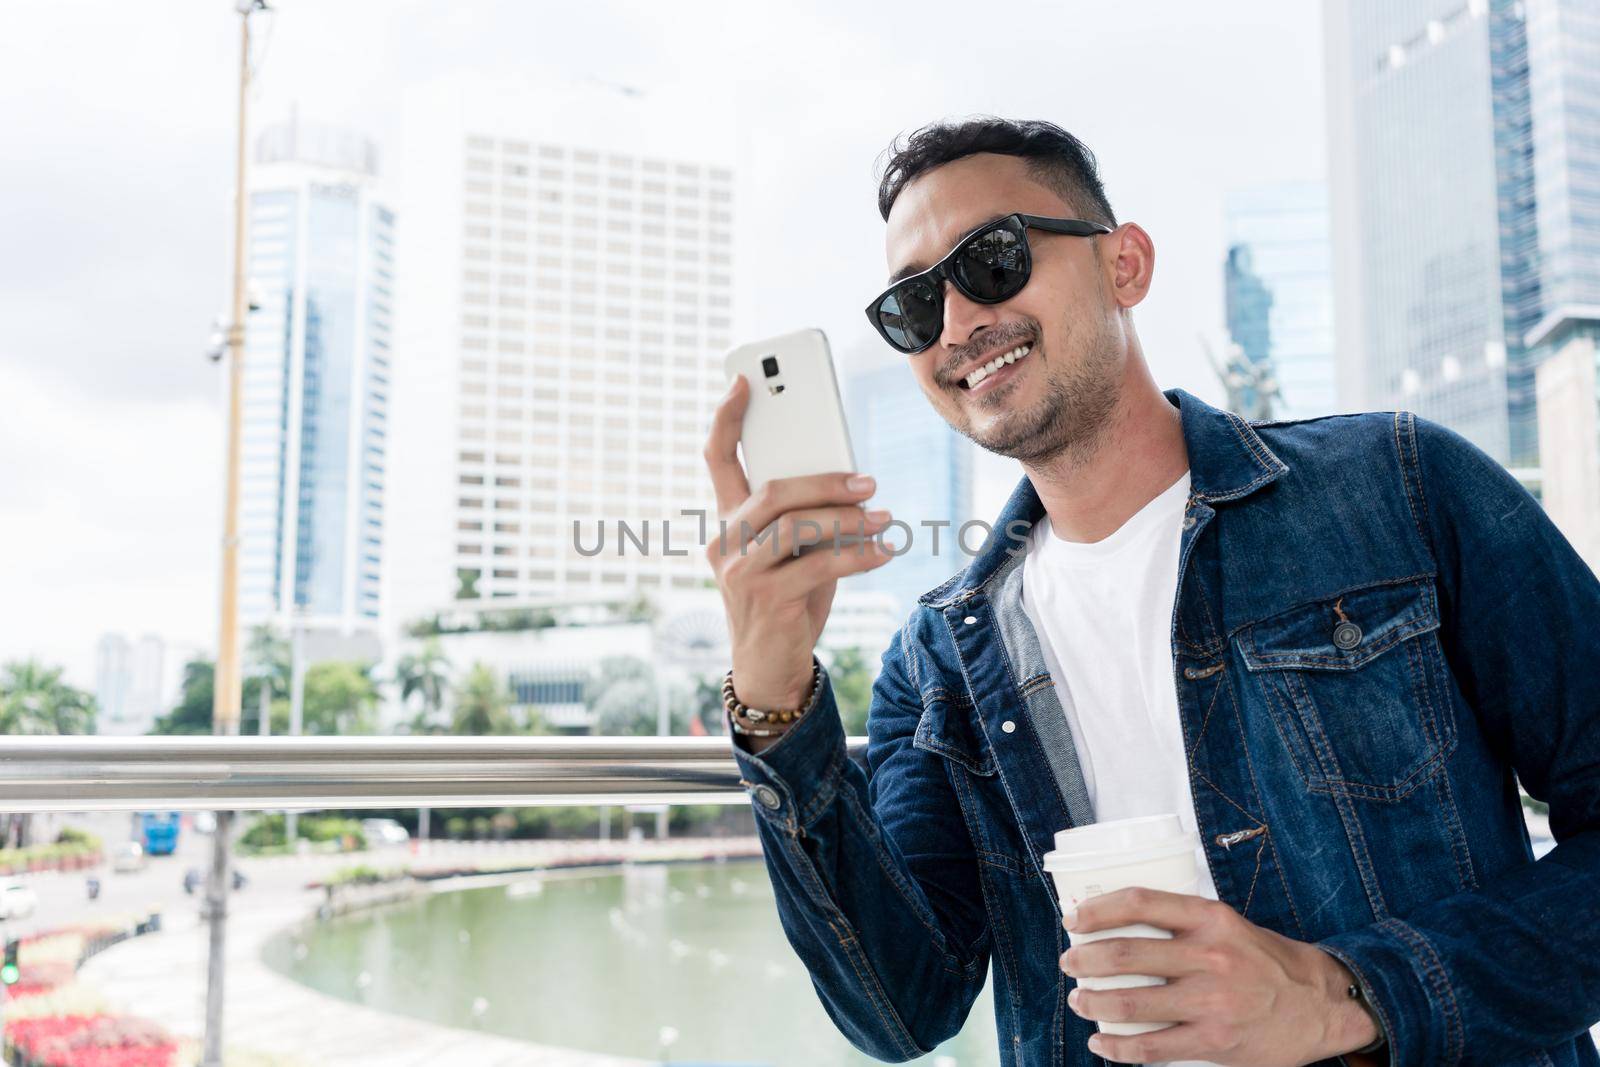 Portrait of a trendy young man smiling during online communication on his smartphone, outdoors while visiting a modern city